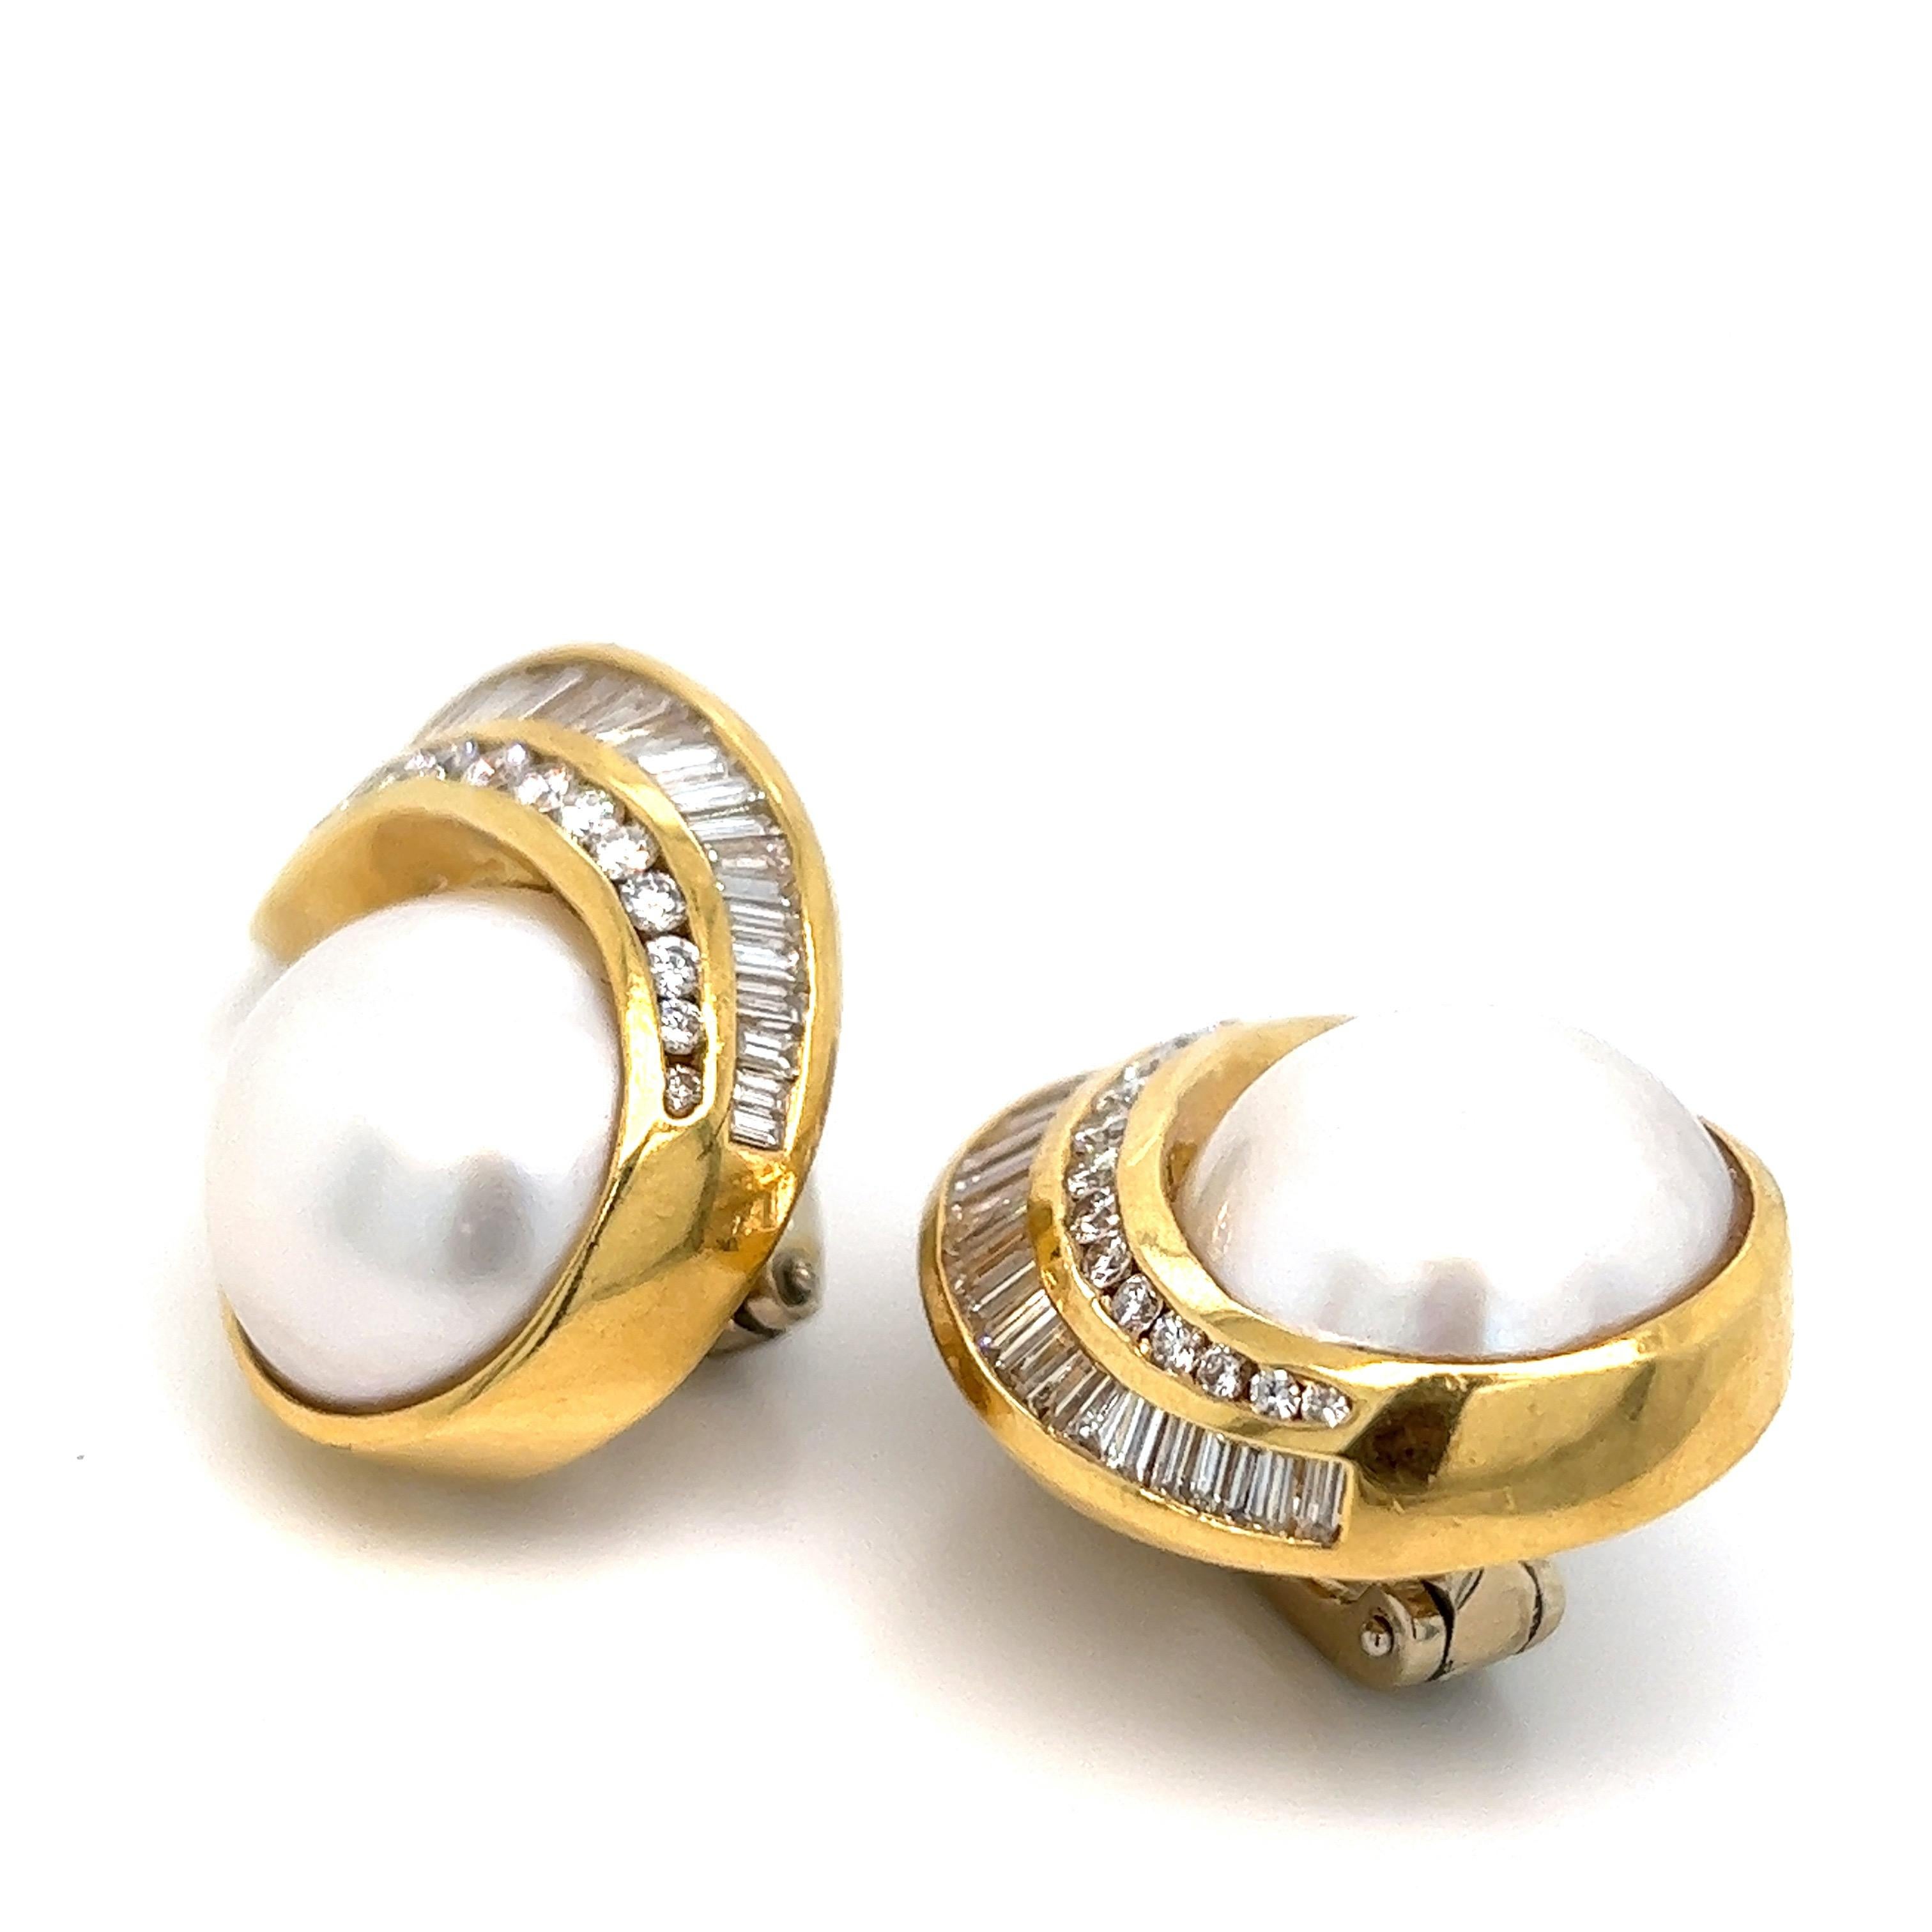 Charles Krypell Mabé Pearls Diamond Gold Ear Clips In Excellent Condition For Sale In New York, NY